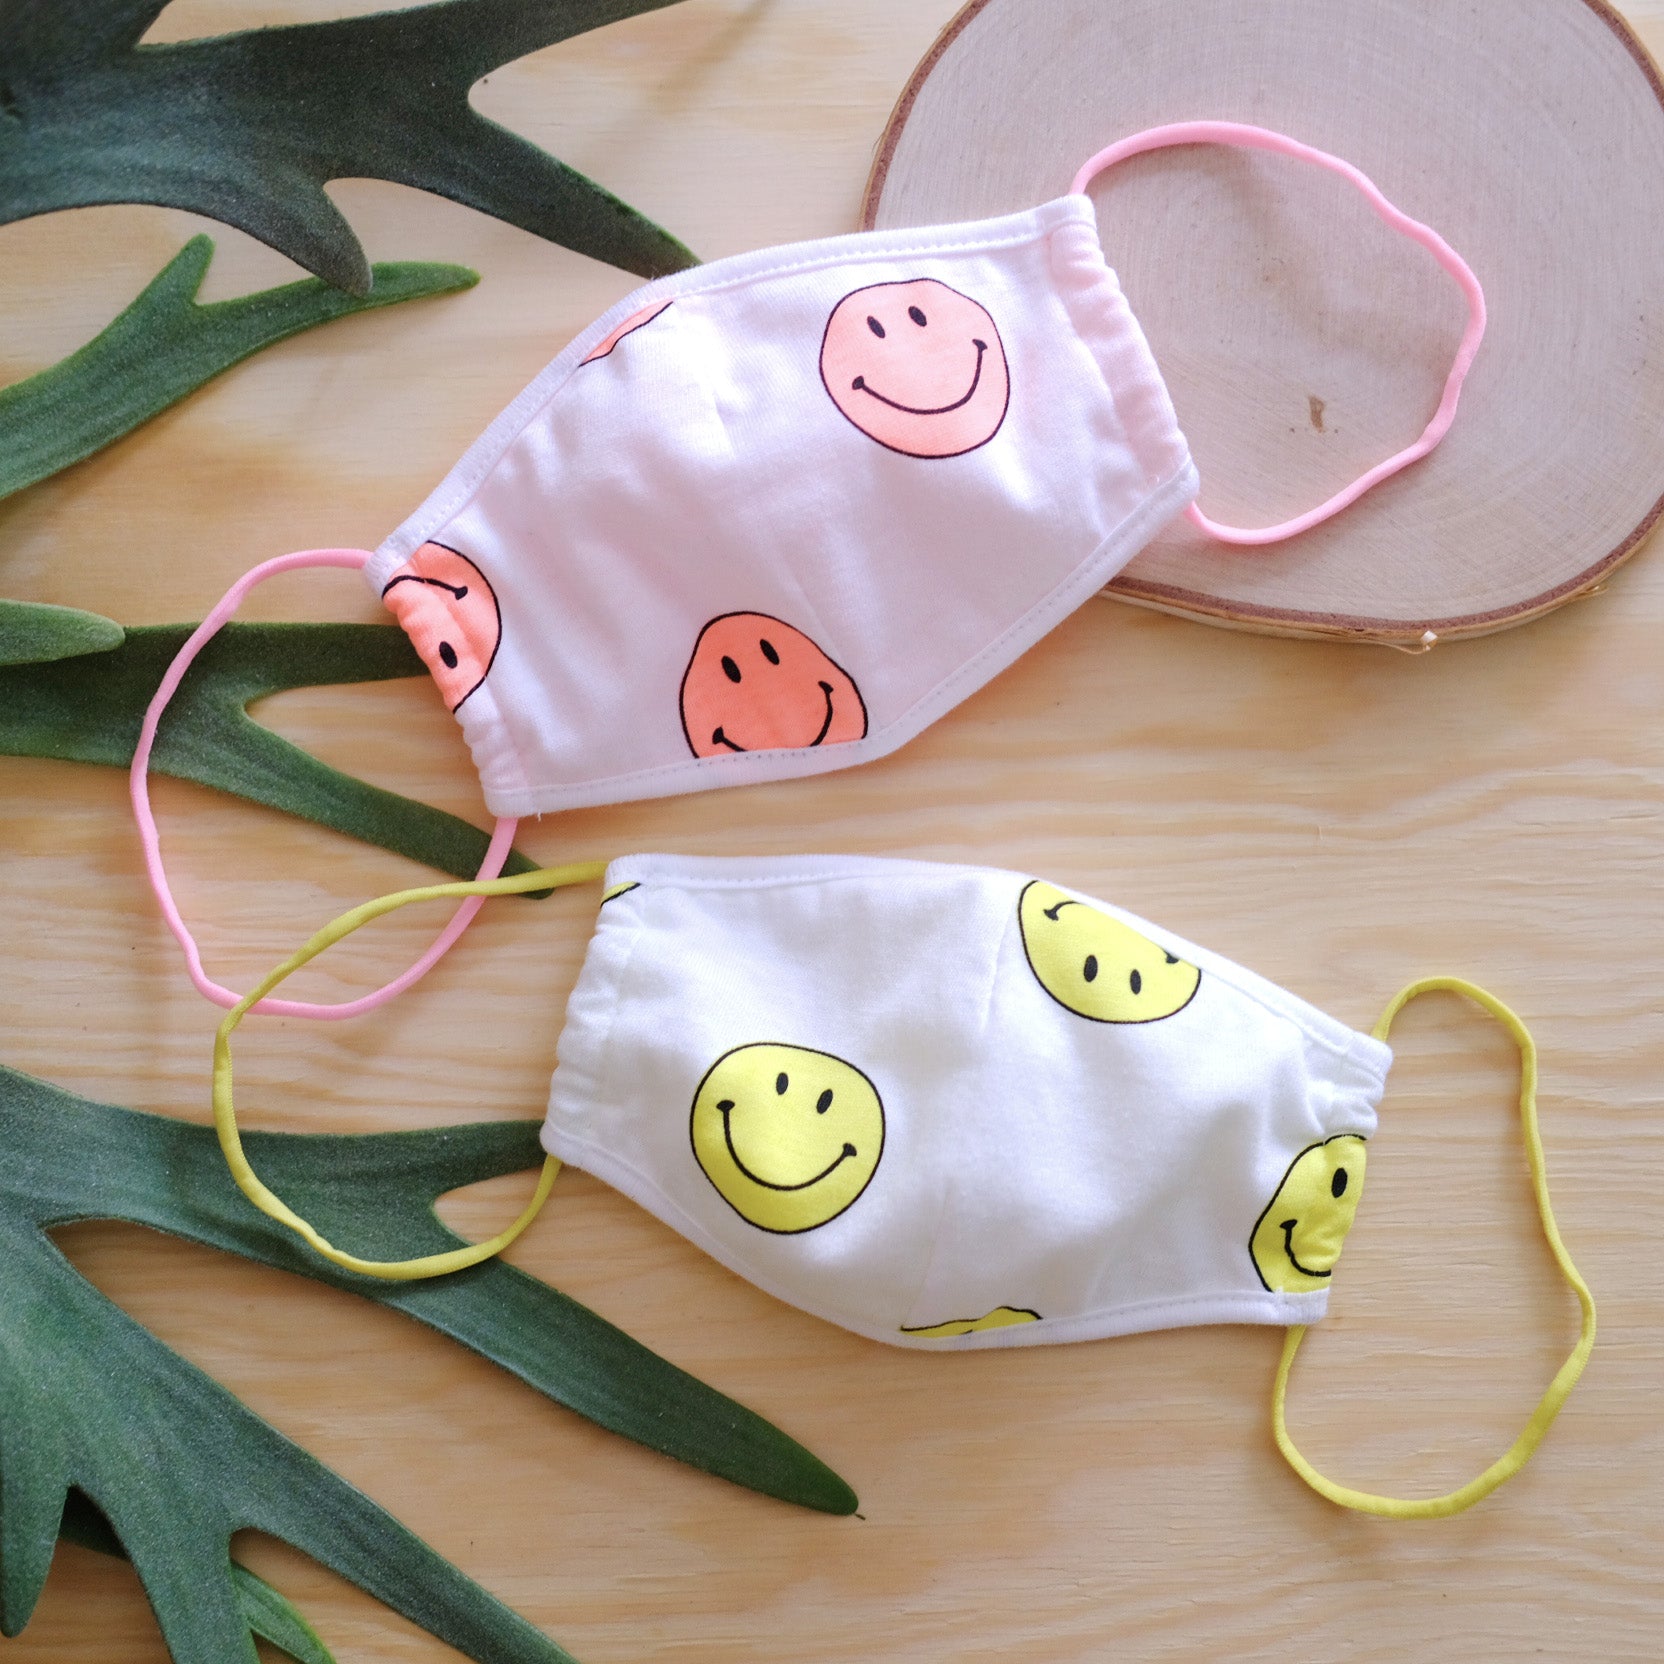 PREORDER Kids Smiley Mask (mid July delivery) - Oh Happy Fry - we ship worldwide